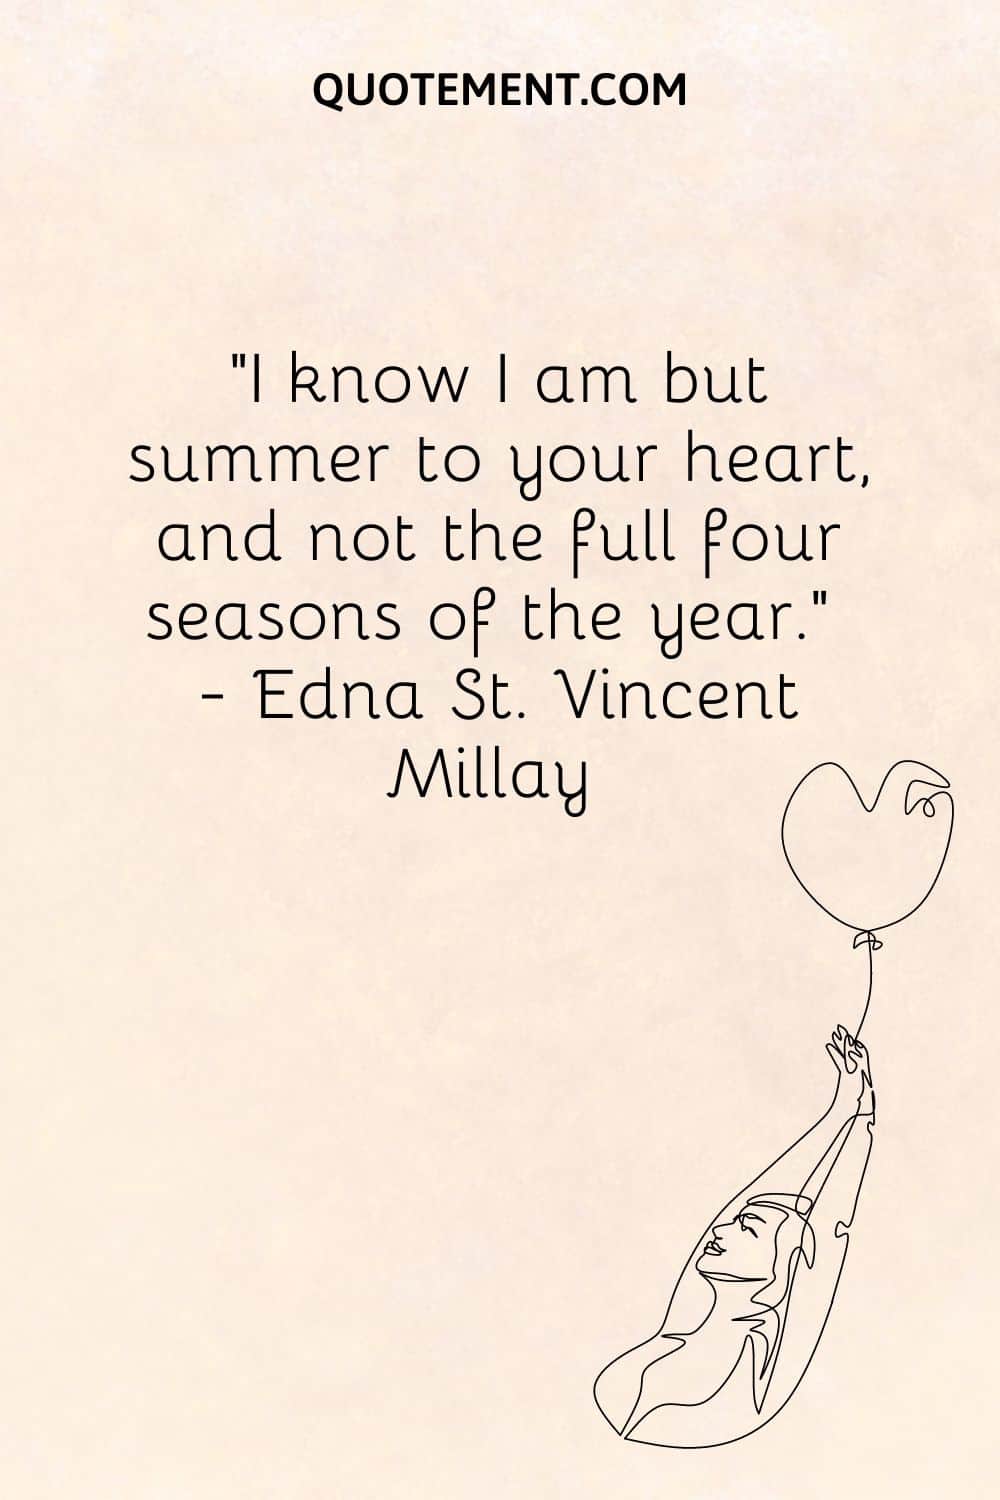 I know I am but summer to your heart, and not the full four seasons of the year.